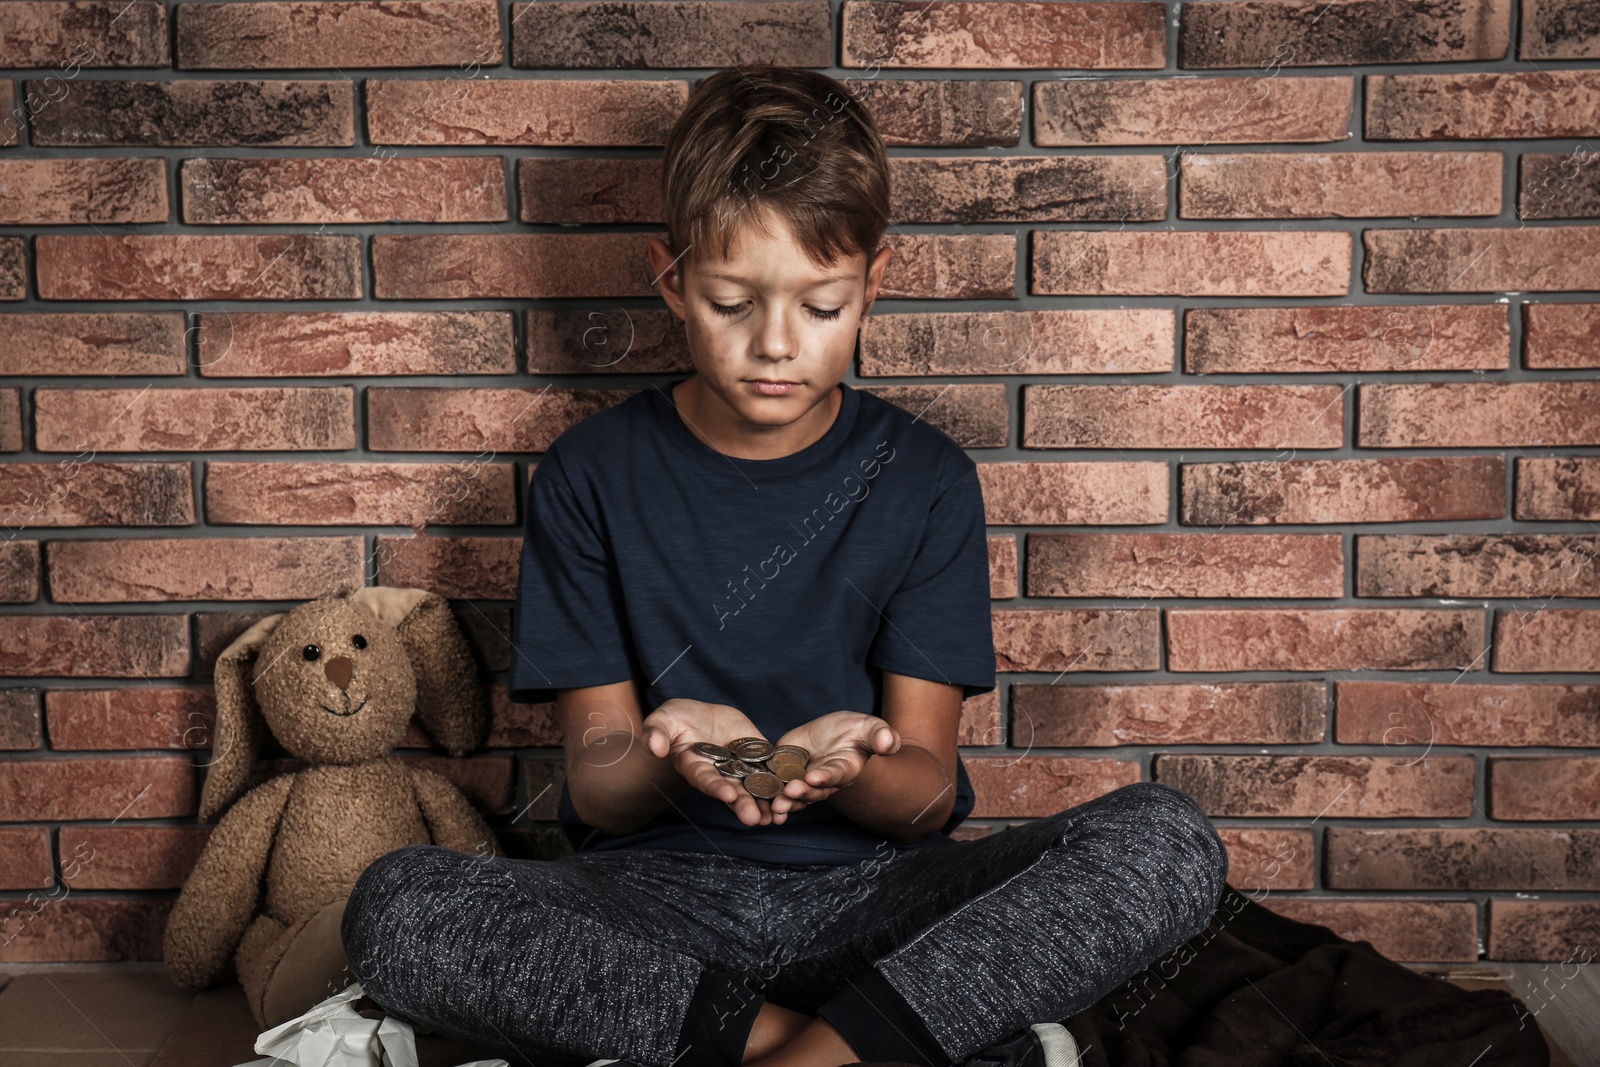 Photo of Poor homeless boy holding coins on floor near brick wall